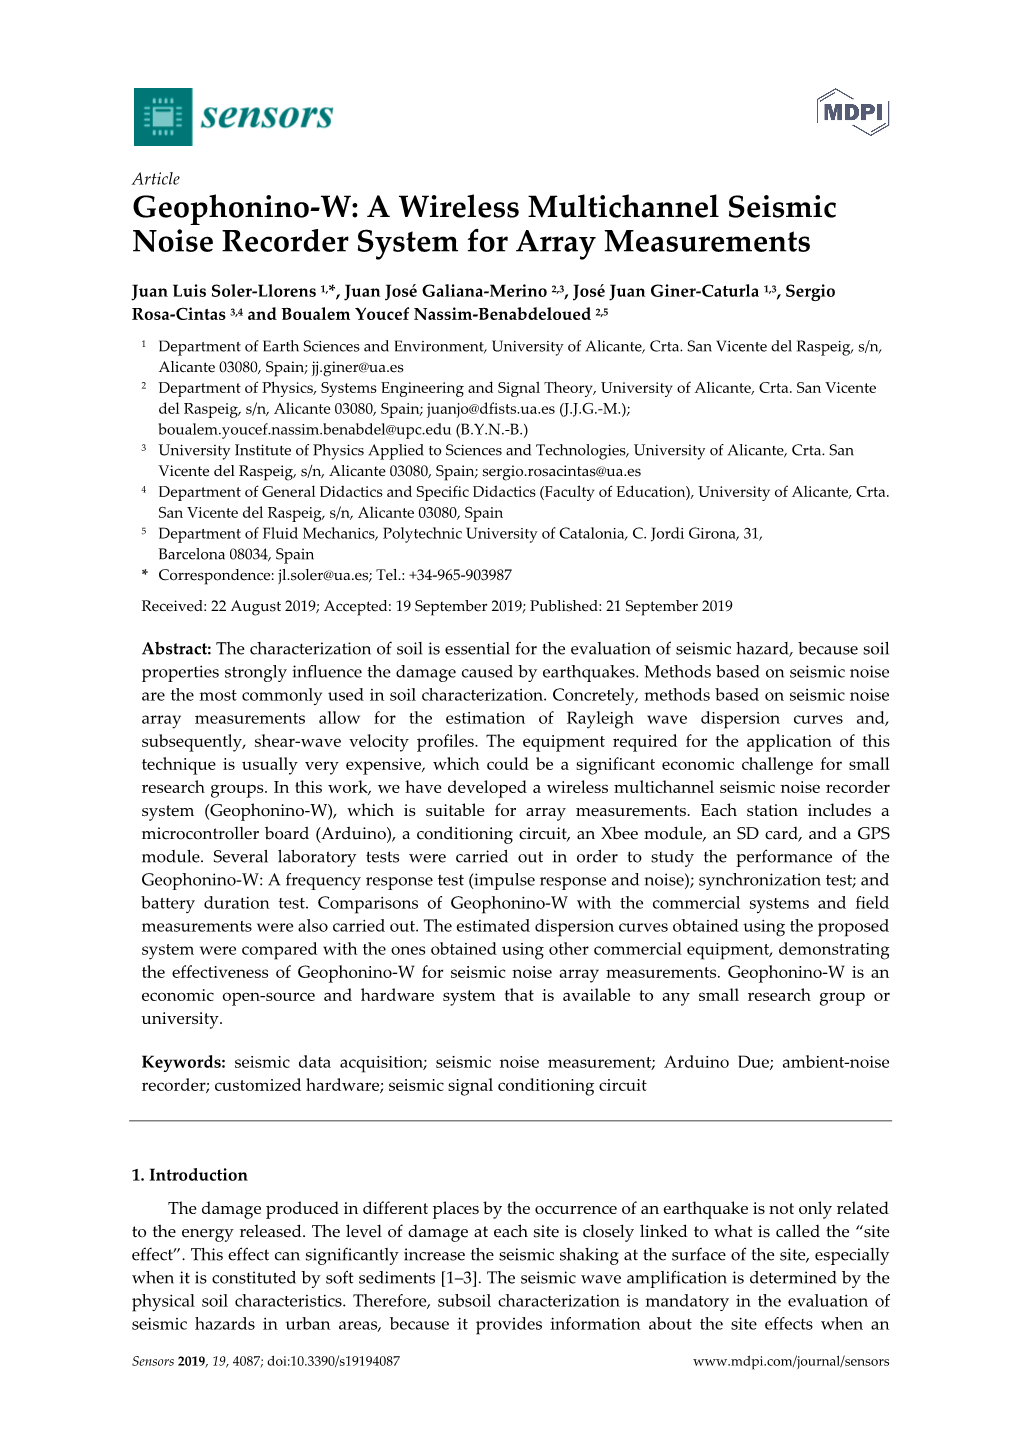 A Wireless Multichannel Seismic Noise Recorder System for Array Measurements